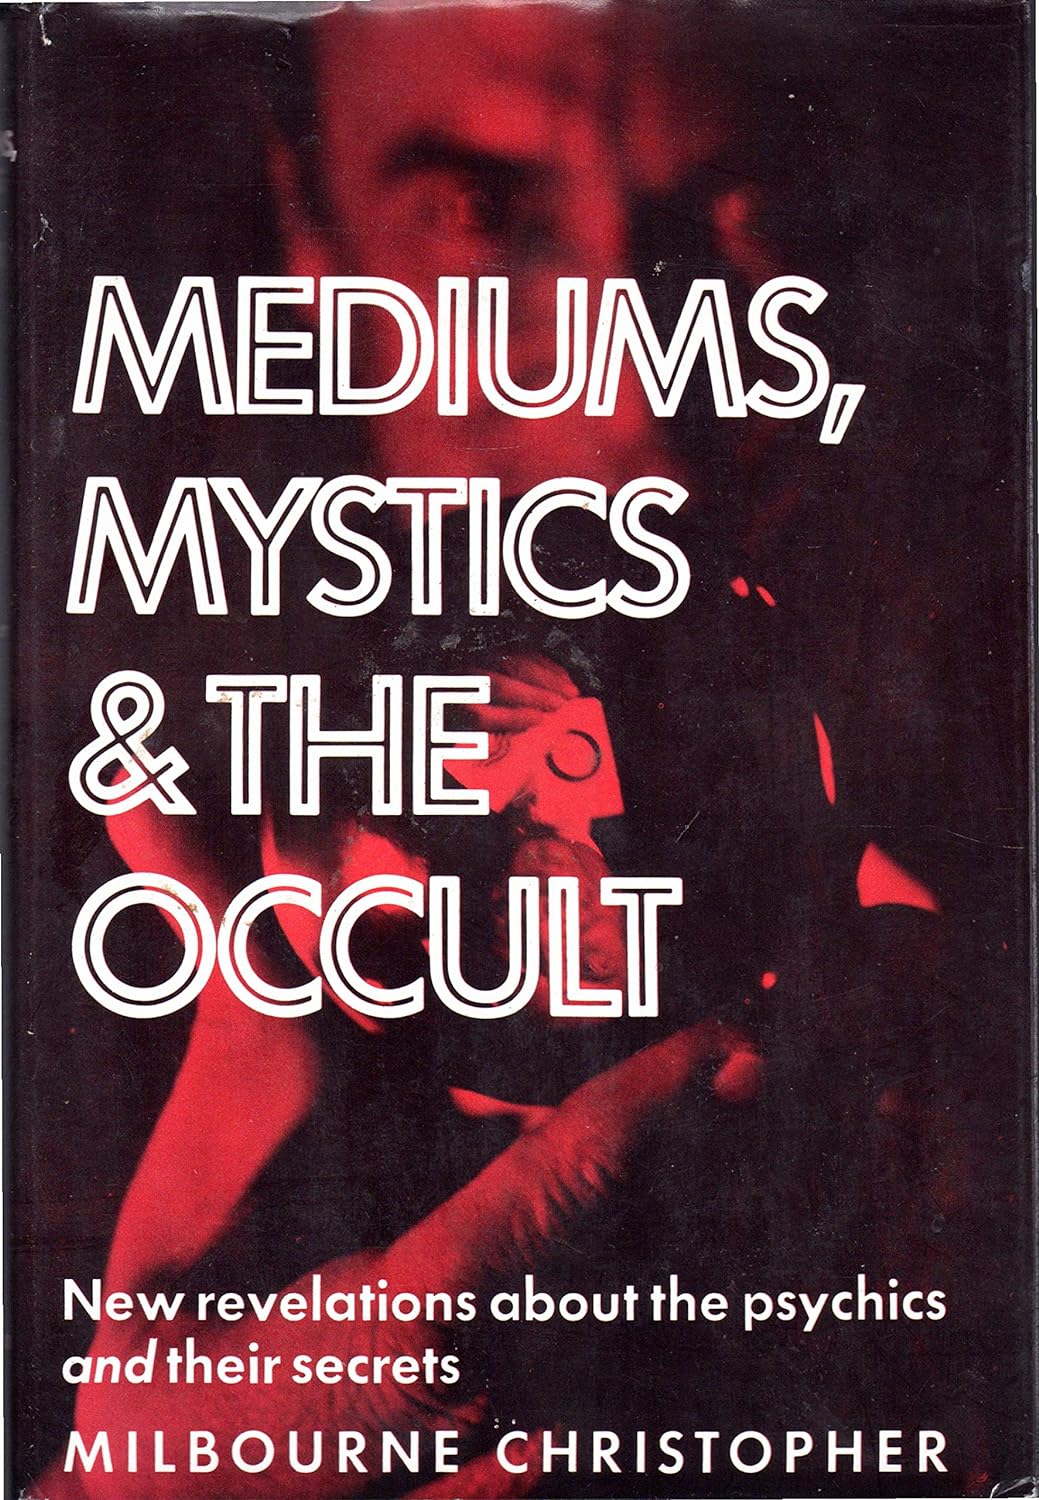 Milbourne Christopher - Mediums, Mystics and the Occult